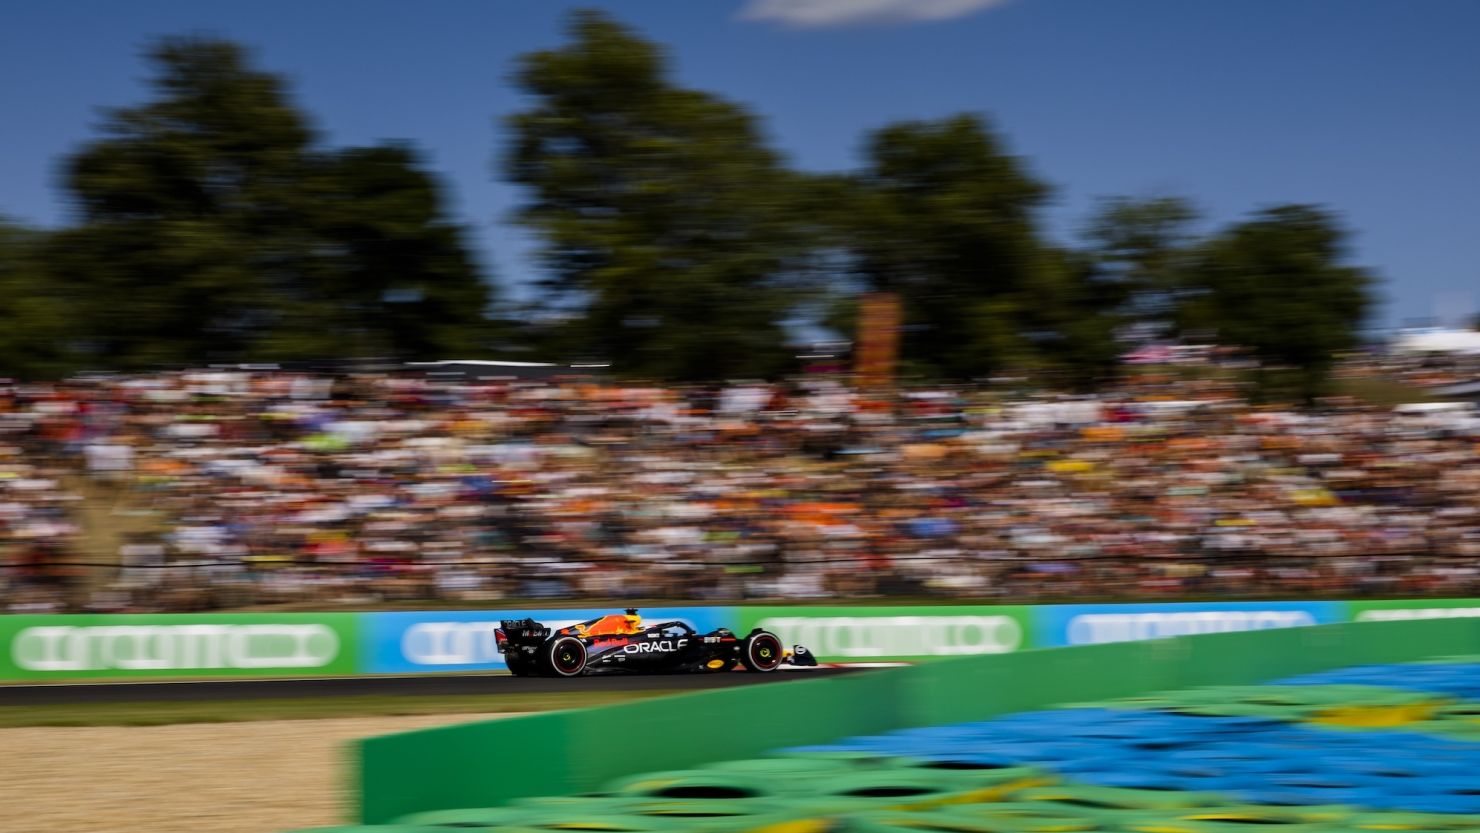 BUDAPEST - Max Verstappen (Red Bull Racing) during the Hungarian Grand Prix at the Hungaroring. ANP REMKO DE WAAL (Photo by ANP via Getty Images)